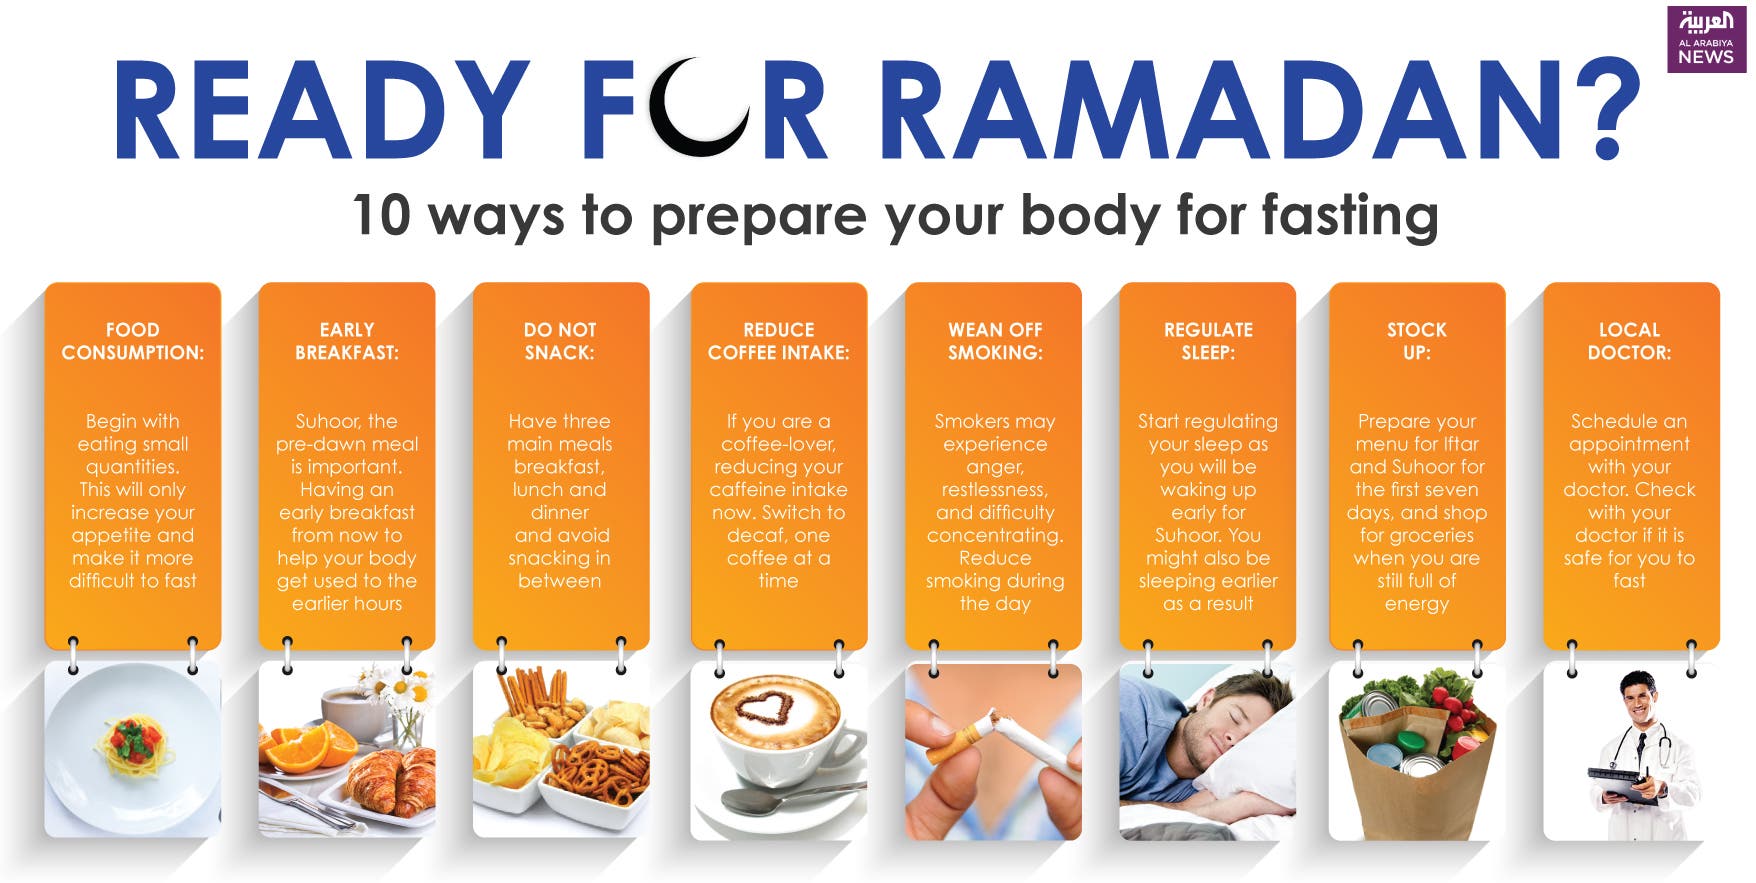 Ready for Ramadan? 10 ways to prepare your body for fasting Al